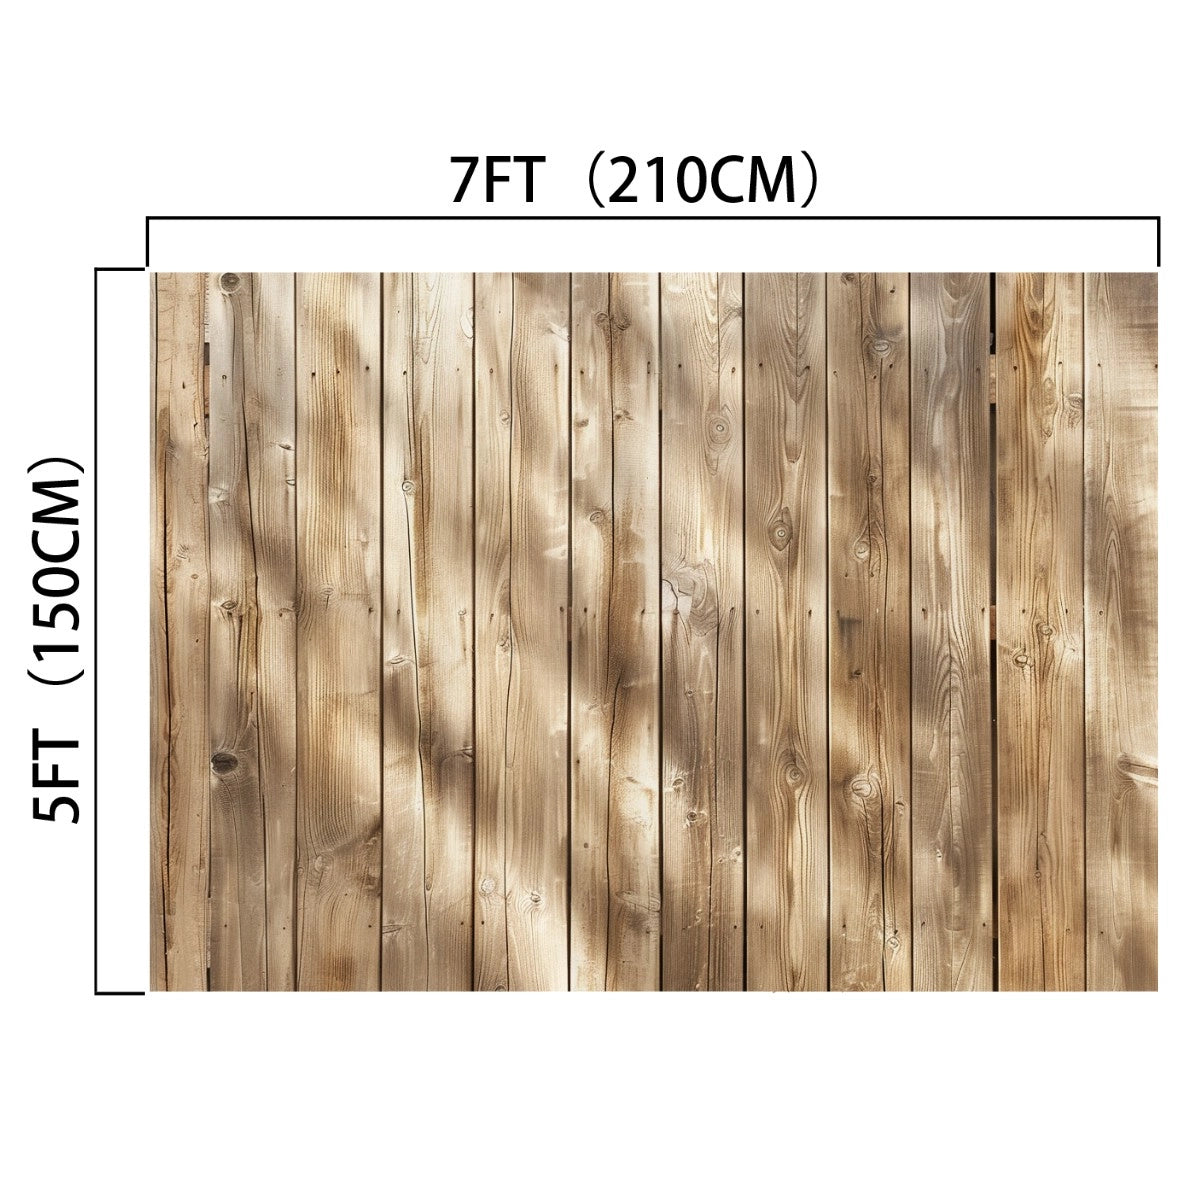 ideasbackdrop Brown Wood Backdrops for Photography Vintage Brown Background Baby Shower Birthday Photo Booth Studio Props, measuring 7 feet (210 cm) wide and 5 feet (150 cm) high, offering wrinkle resistance and high-resolution printing for a flawless look.